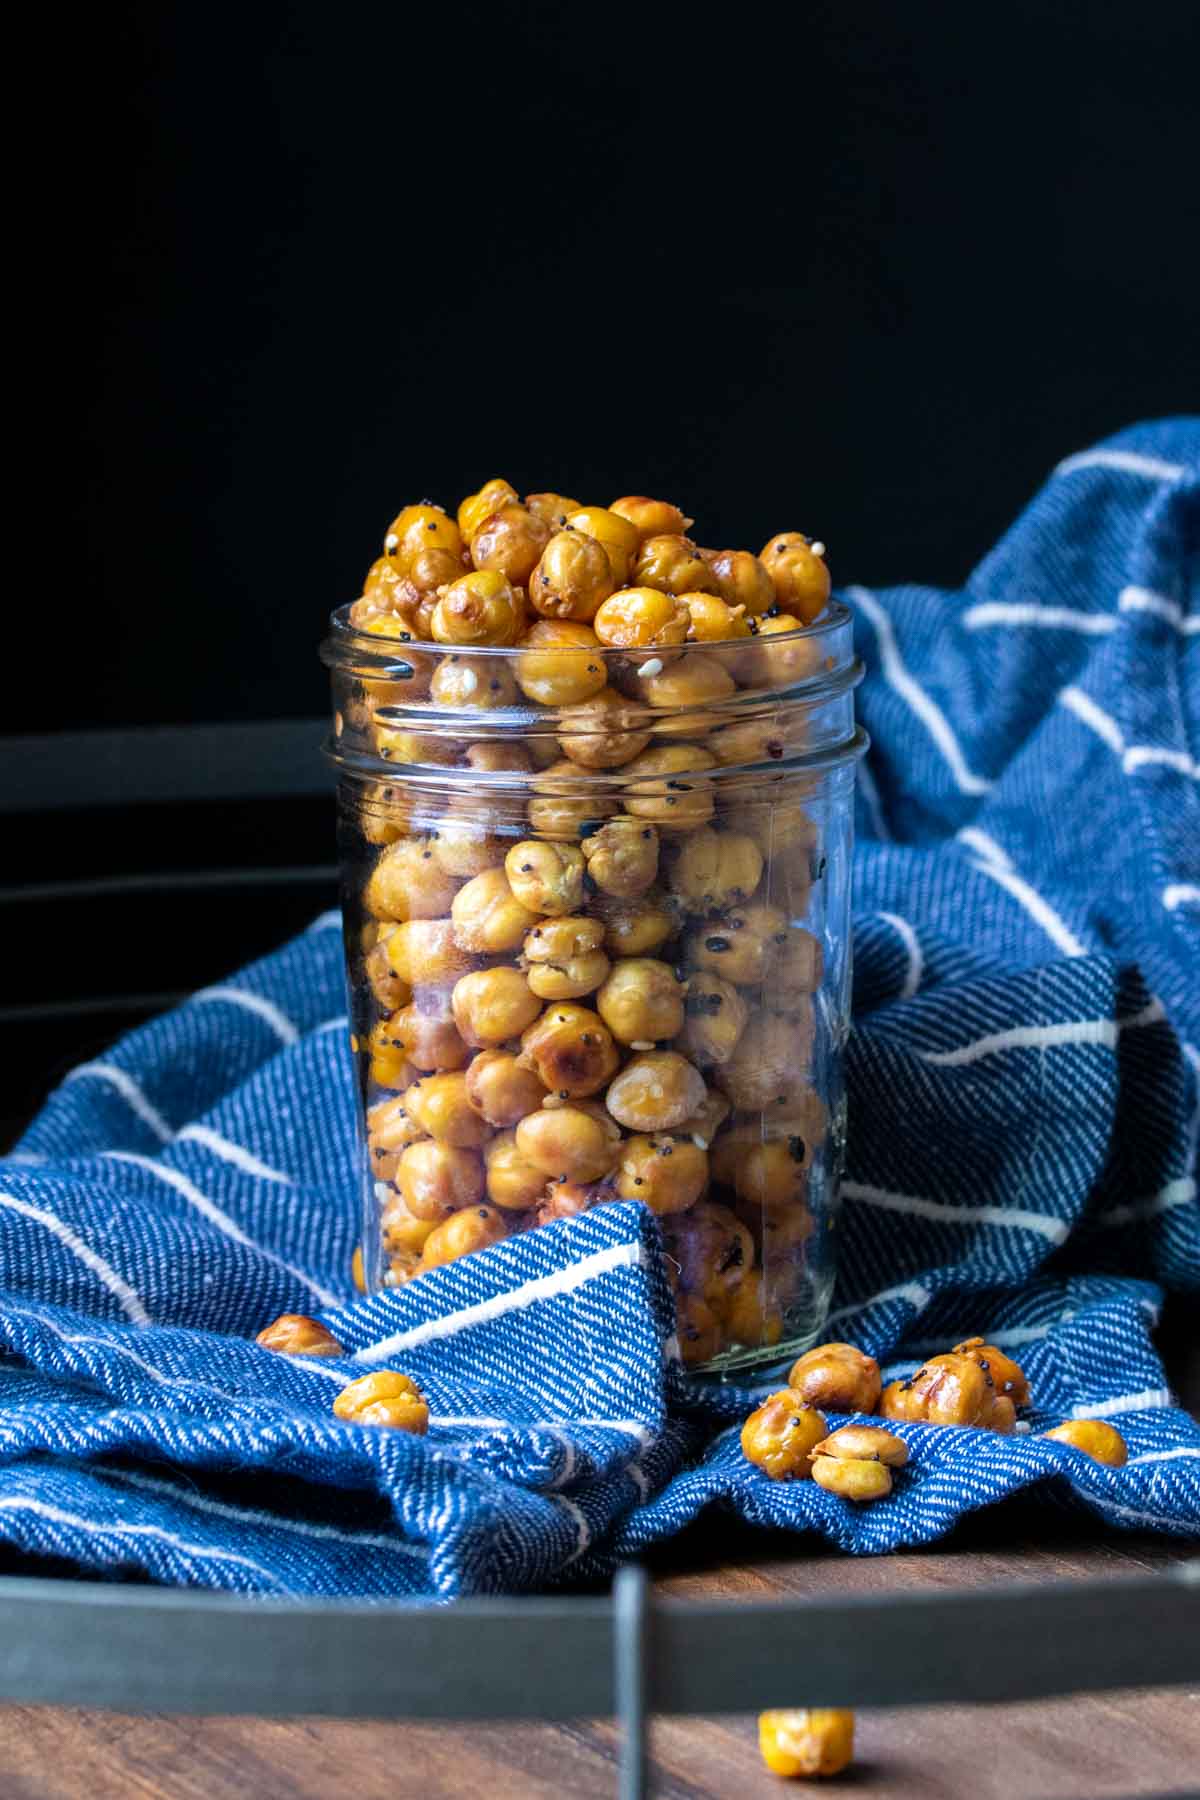 Glass jar on a blue striped towel filled with roasted crispy chickpeas.